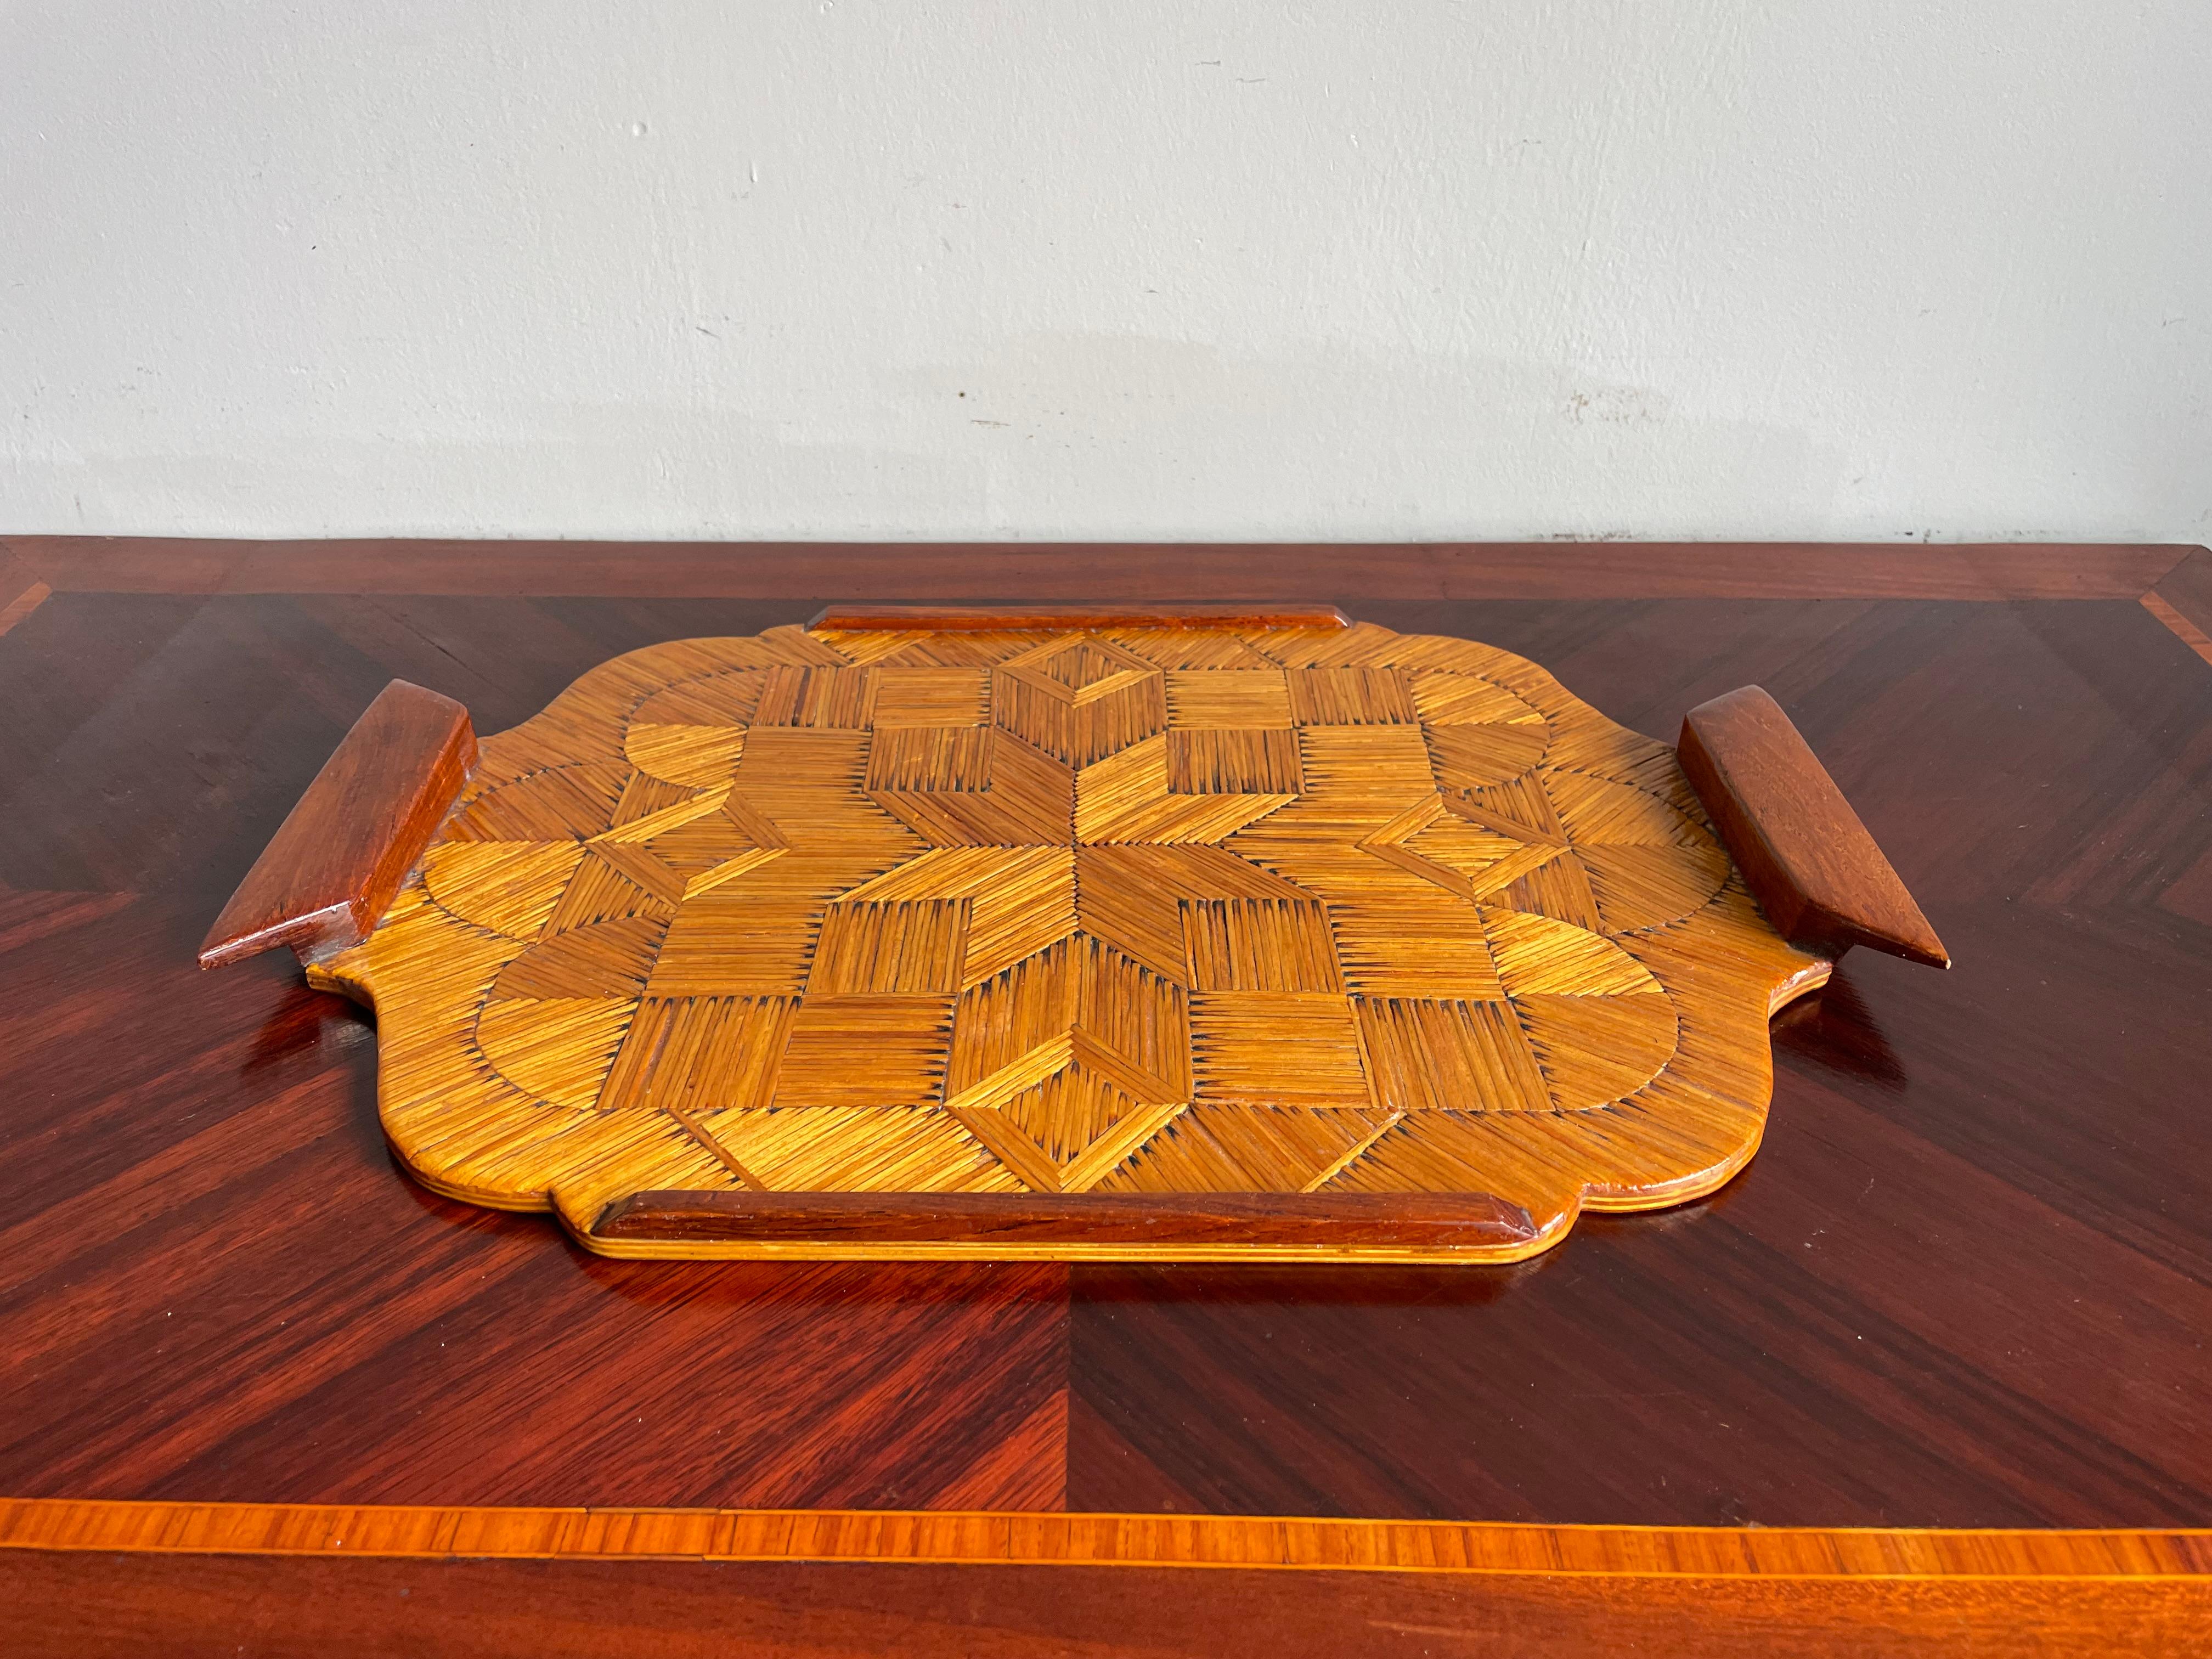 Hand-Crafted Midcentury Folk Art Serving Tray, Handmade of Burnt Matches in Parquetry Pattern For Sale